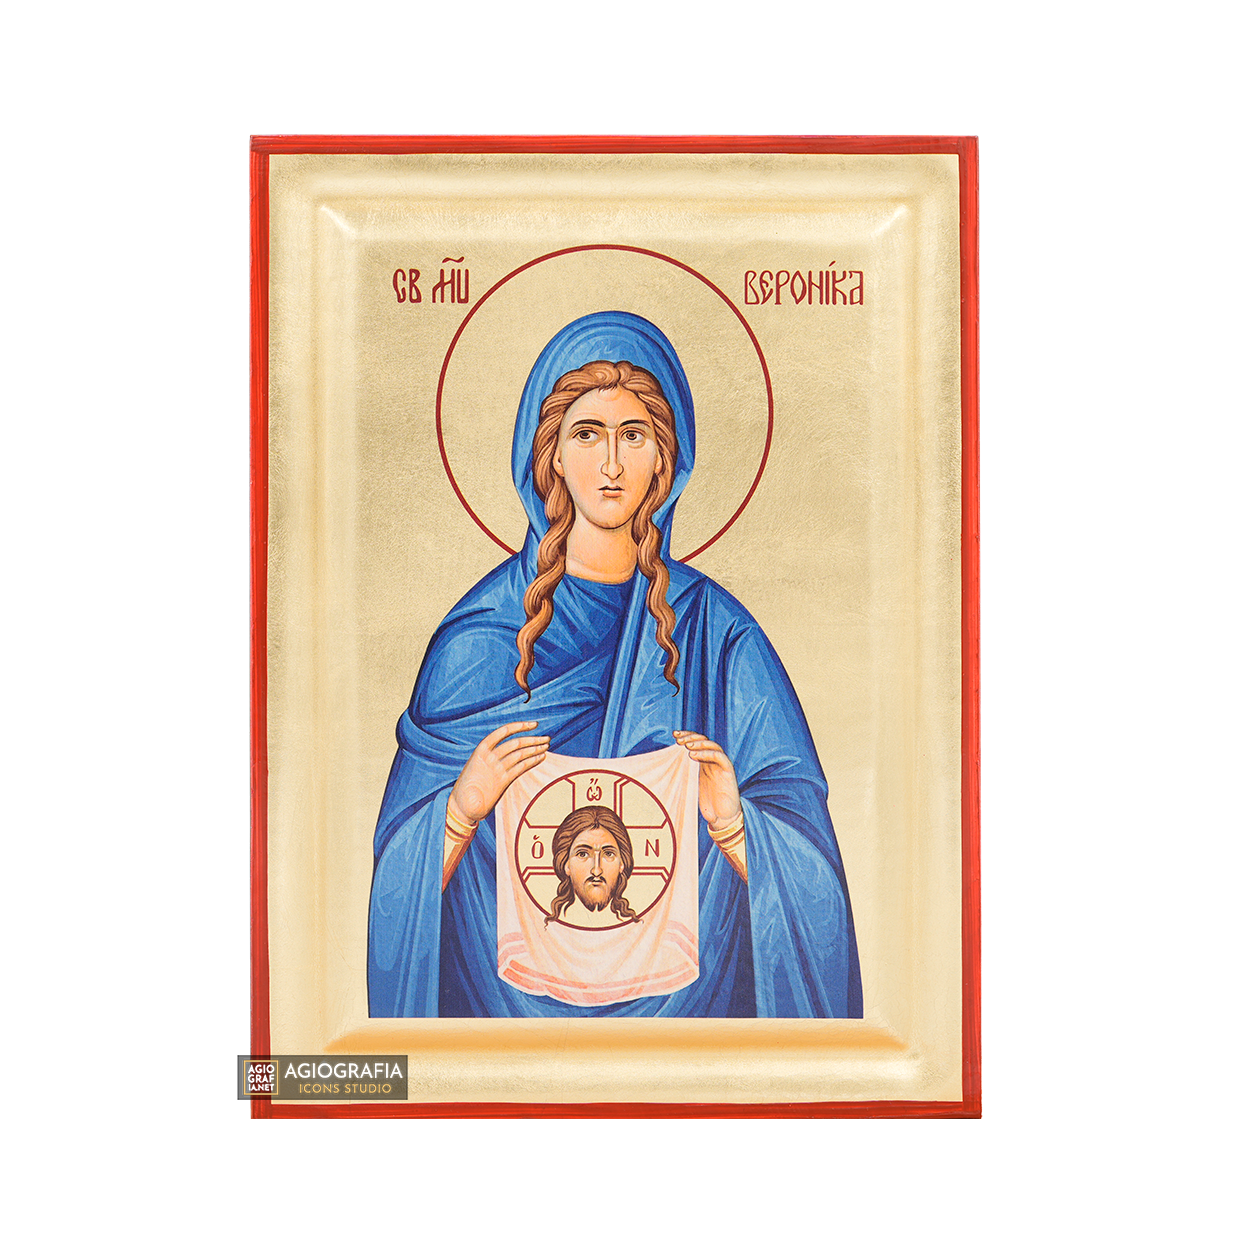 Saint Veronica Christian Orthodox Icon with Gold Leaves